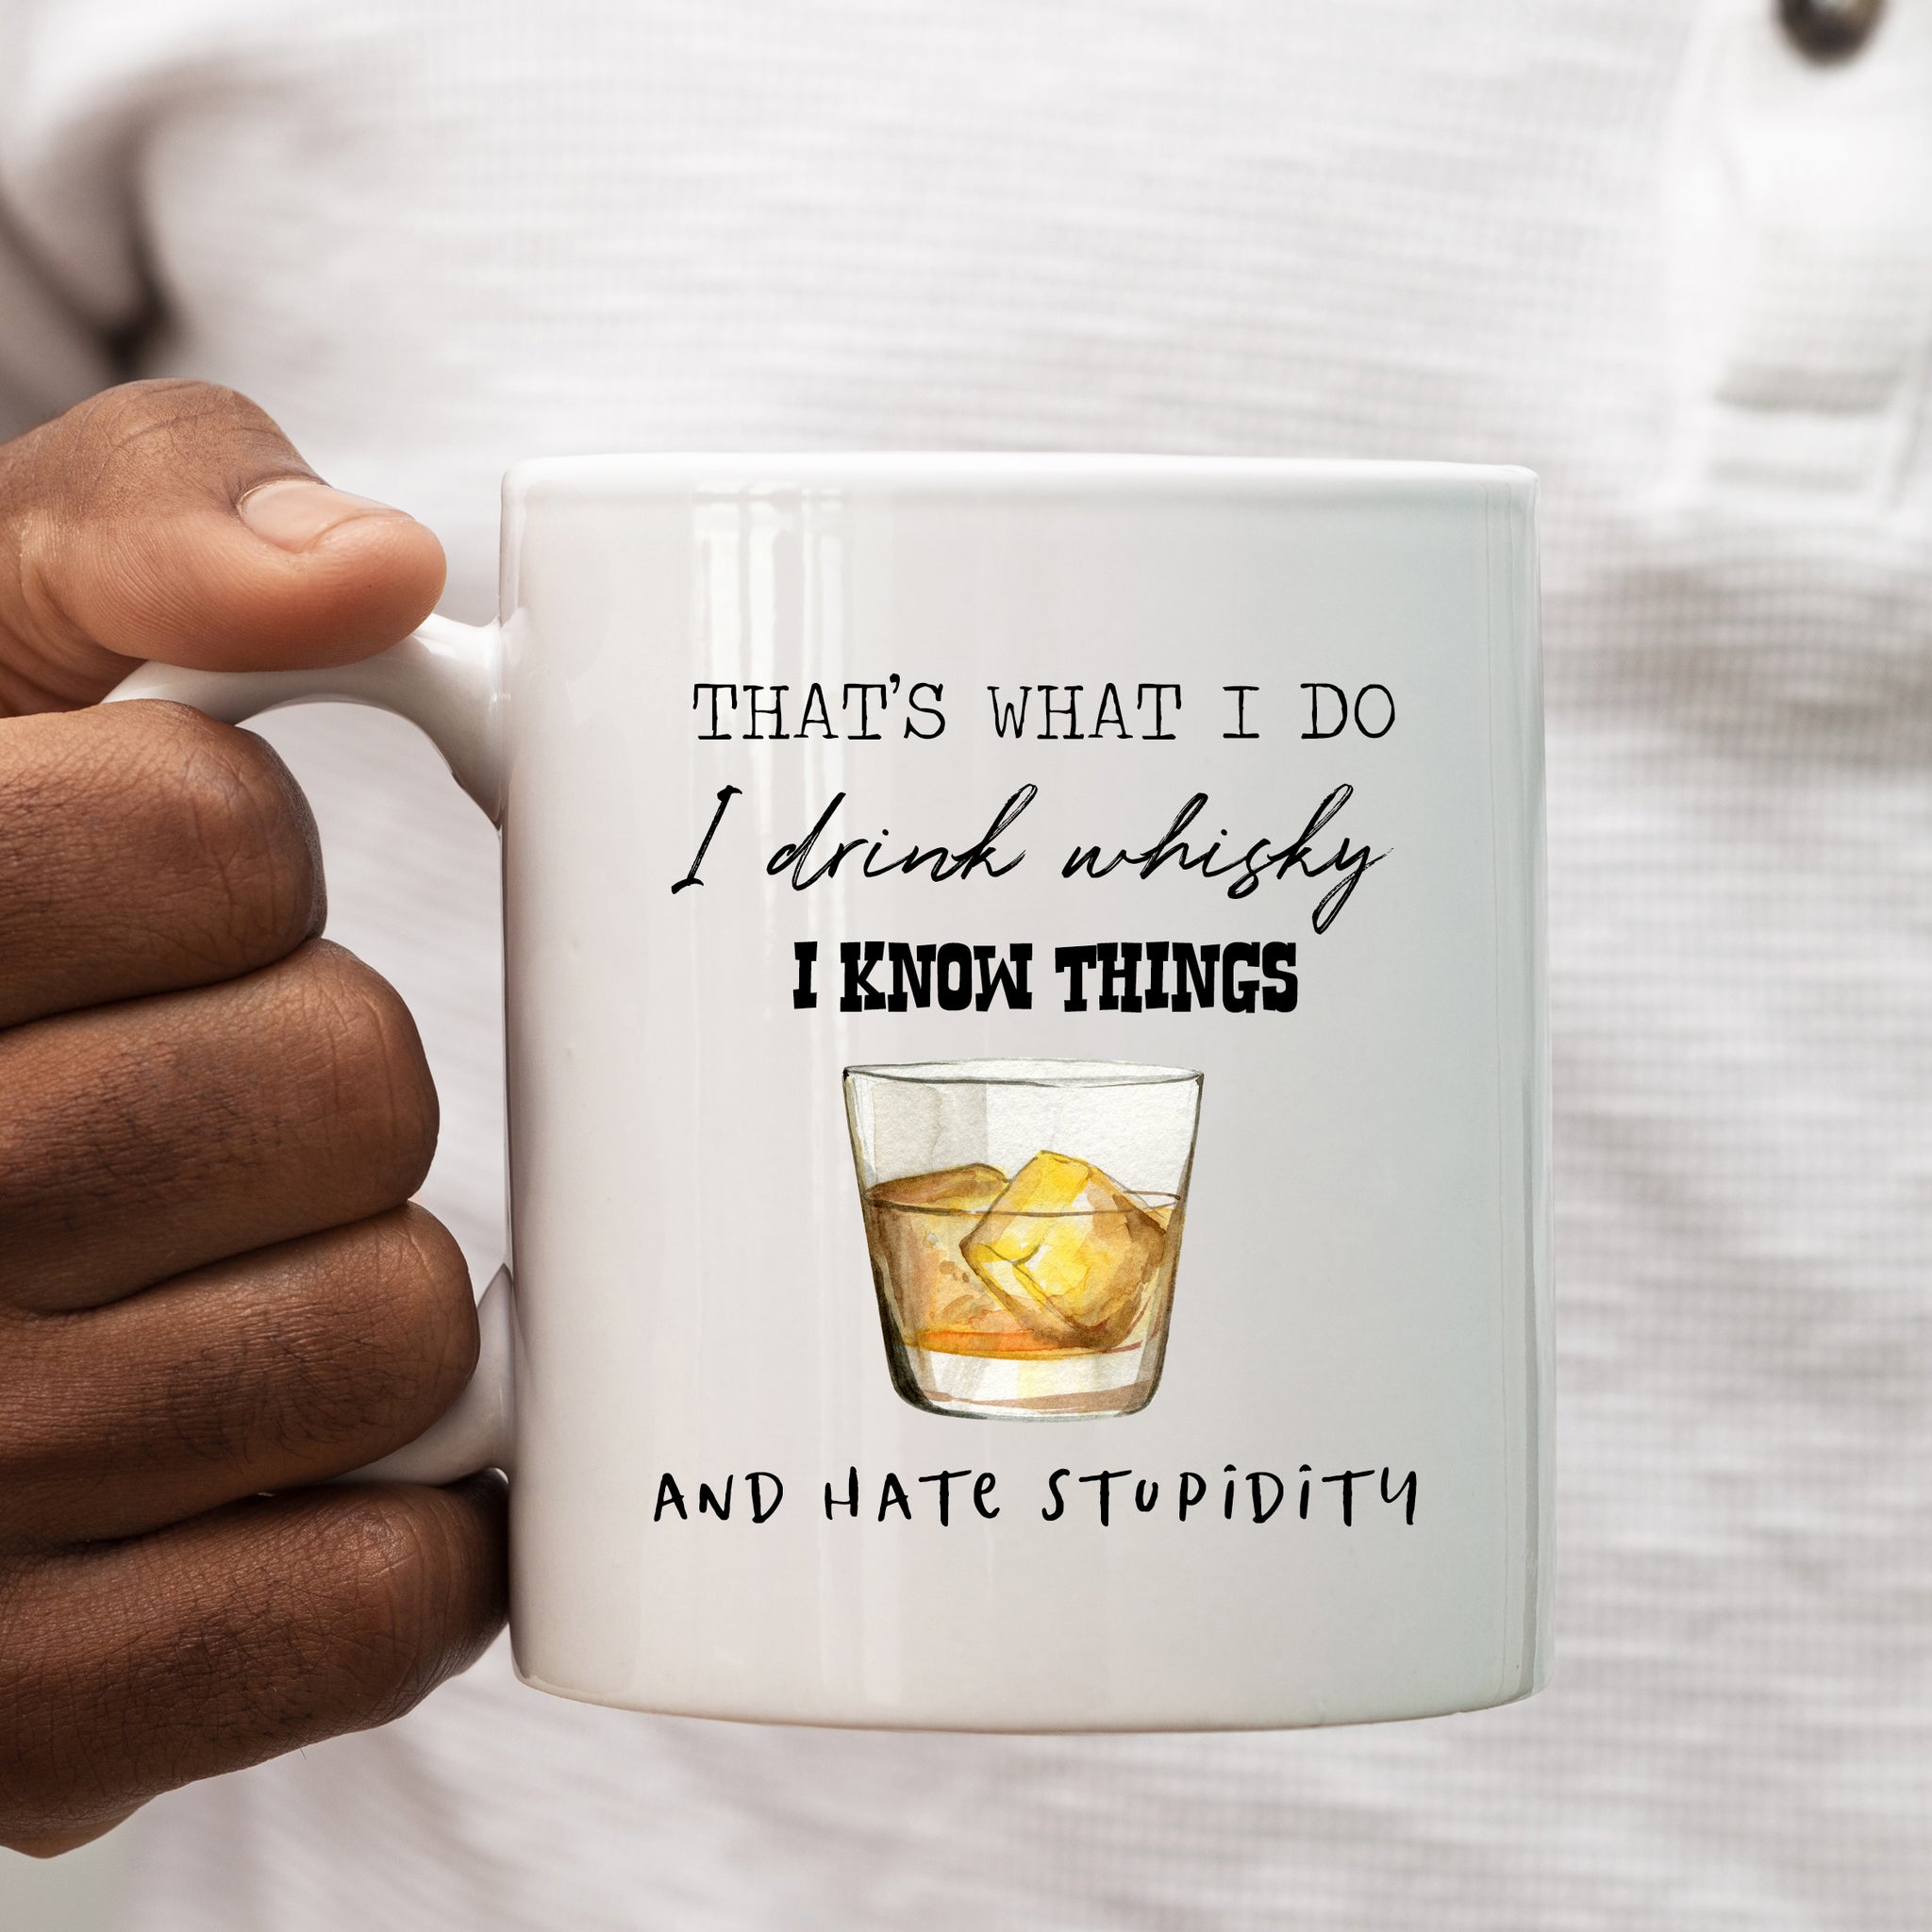 I Drink Whisky, Know Things and Hate Stupidity Mug, Funny Quote Cup For Him or Her